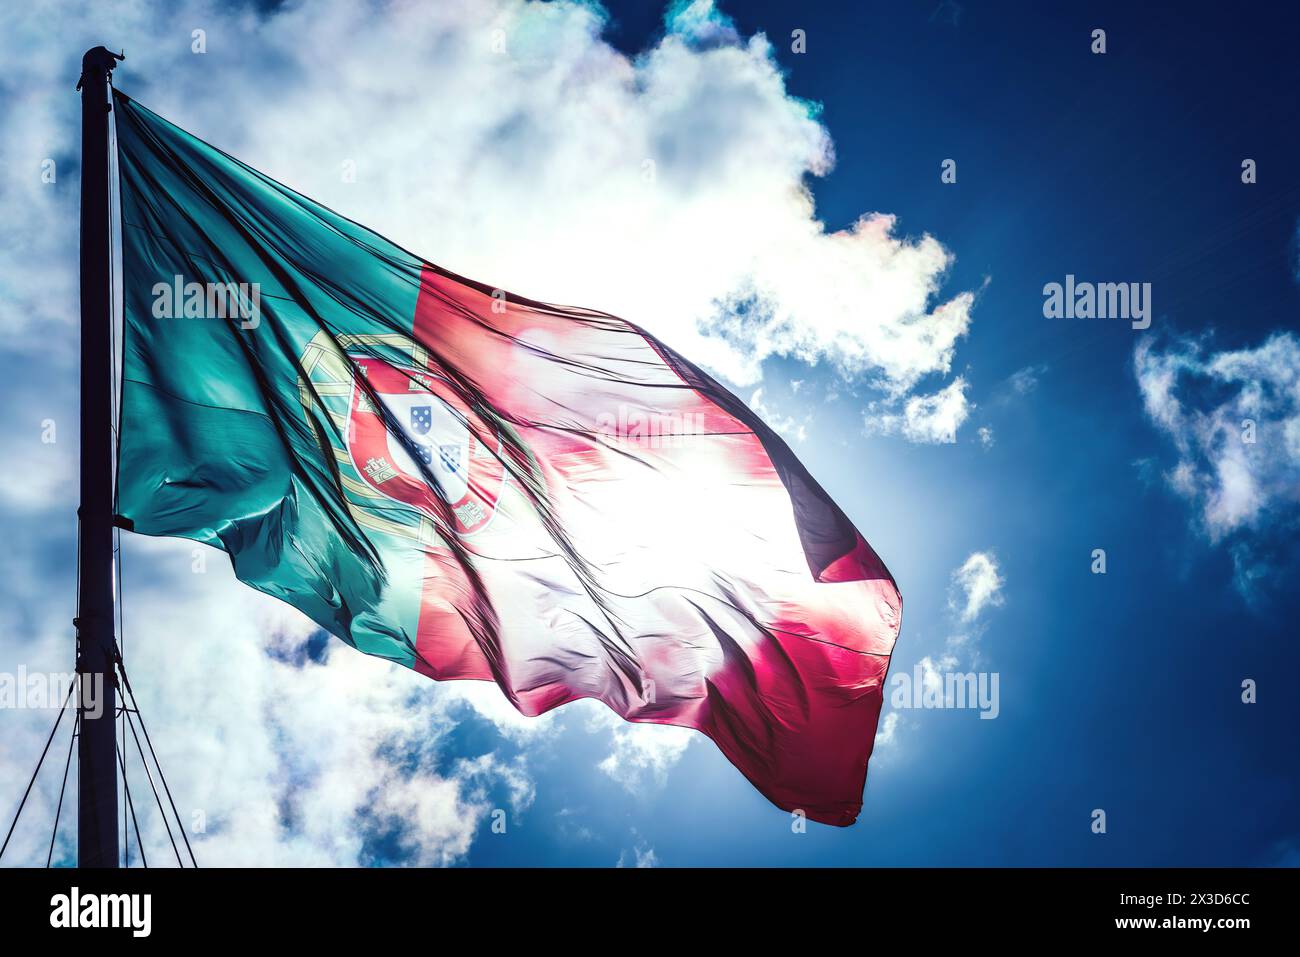 The vibrant colors of the Portuguese flag ripple in the breeze, proudly displayed against a striking backdrop of a clear blue sky Stock Photo